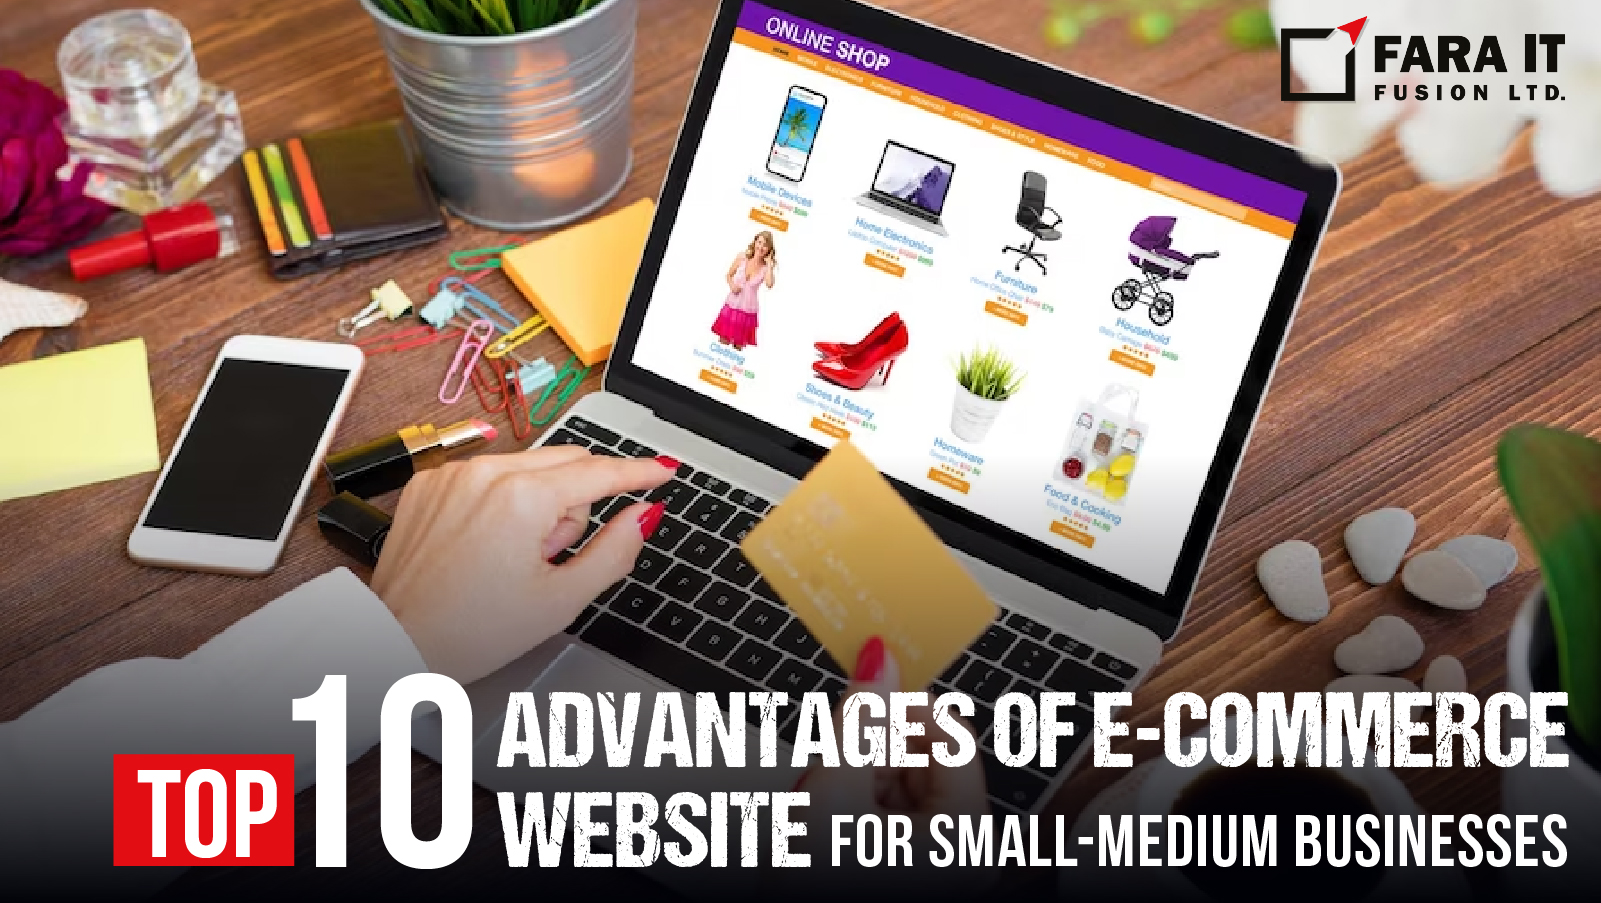 Top 10 Advantages of E-commerce Website for Small-Medium Businesses